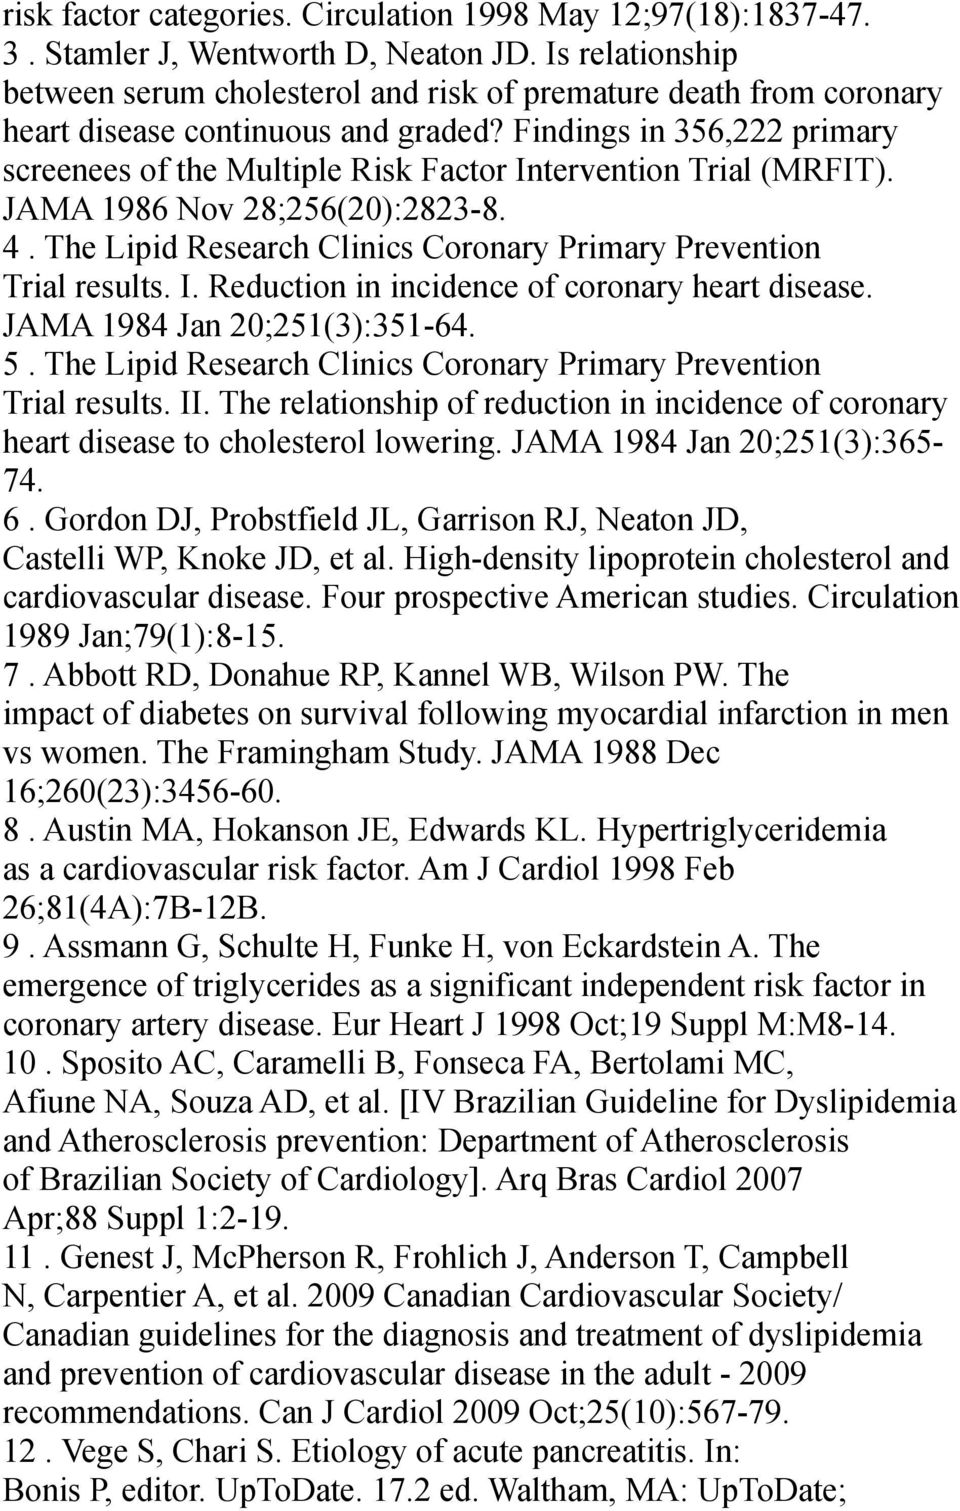 Findings in 356,222 primary screenees of the Multiple Risk Factor Intervention Trial (MRFIT). JAMA 1986 Nov 28;256(20):2823-8. 4. The Lipid Research Clinics Coronary Primary Prevention Trial results.